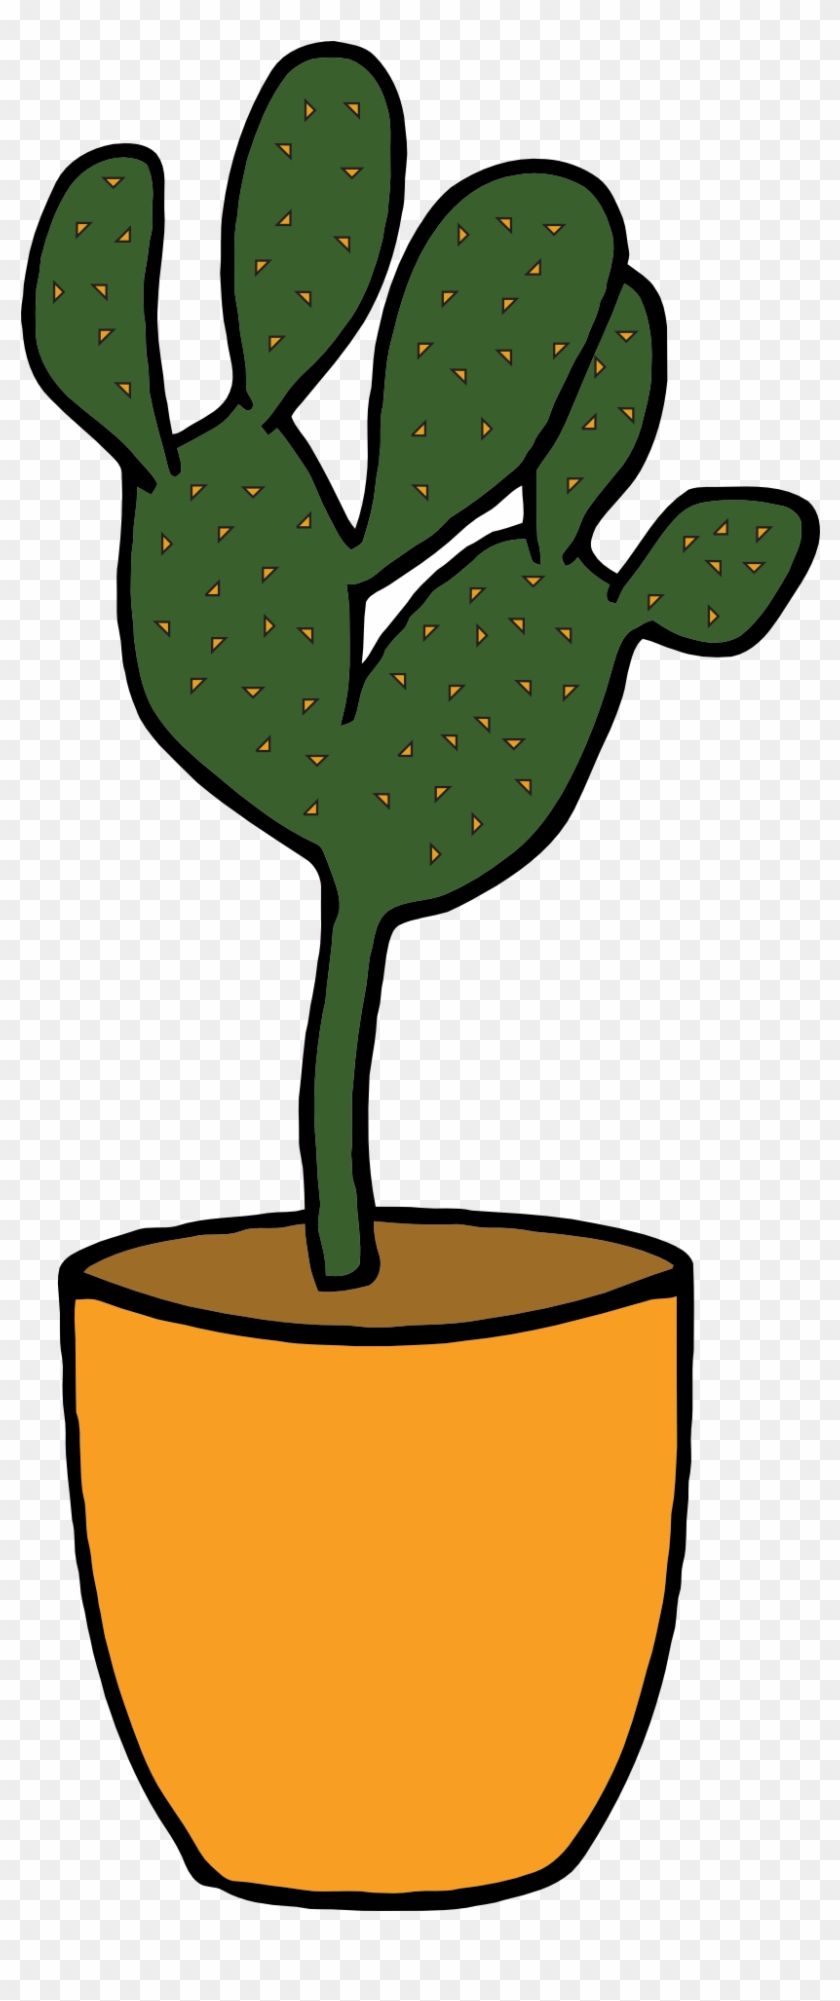 Drawing Of A Green Potted Cactus - Cactus Clipart #5317349